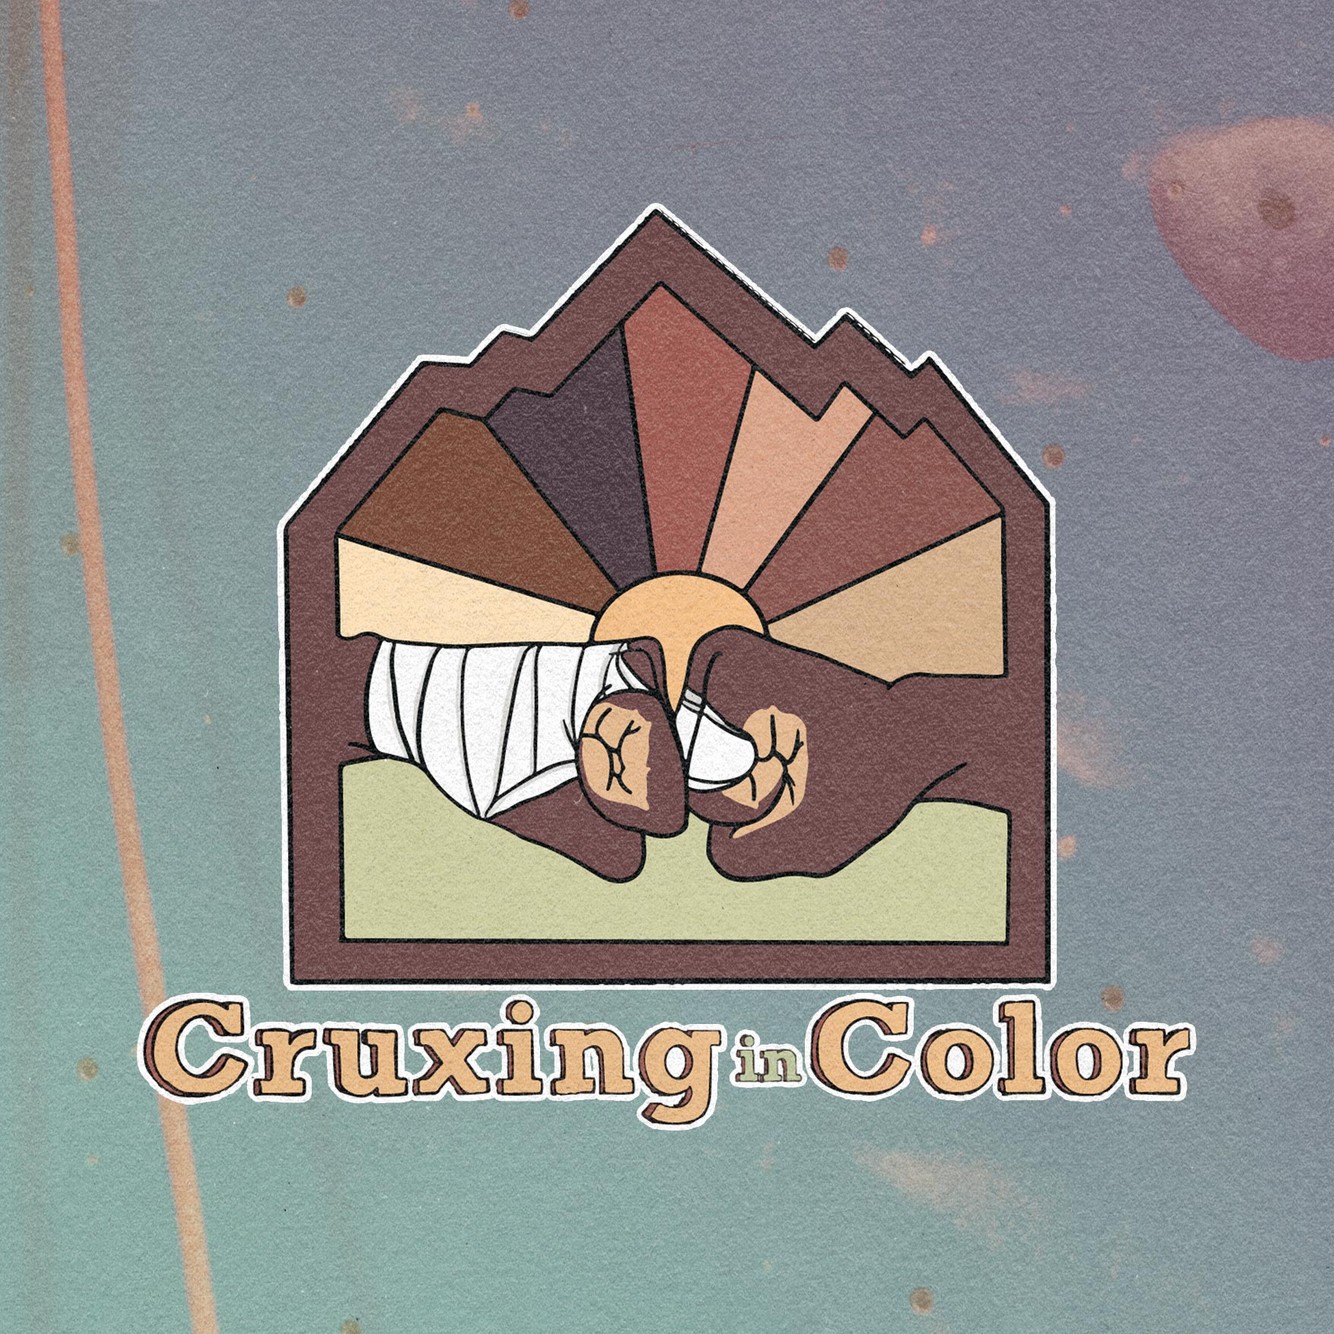 cruxing-in-color-1080-1080.jpg